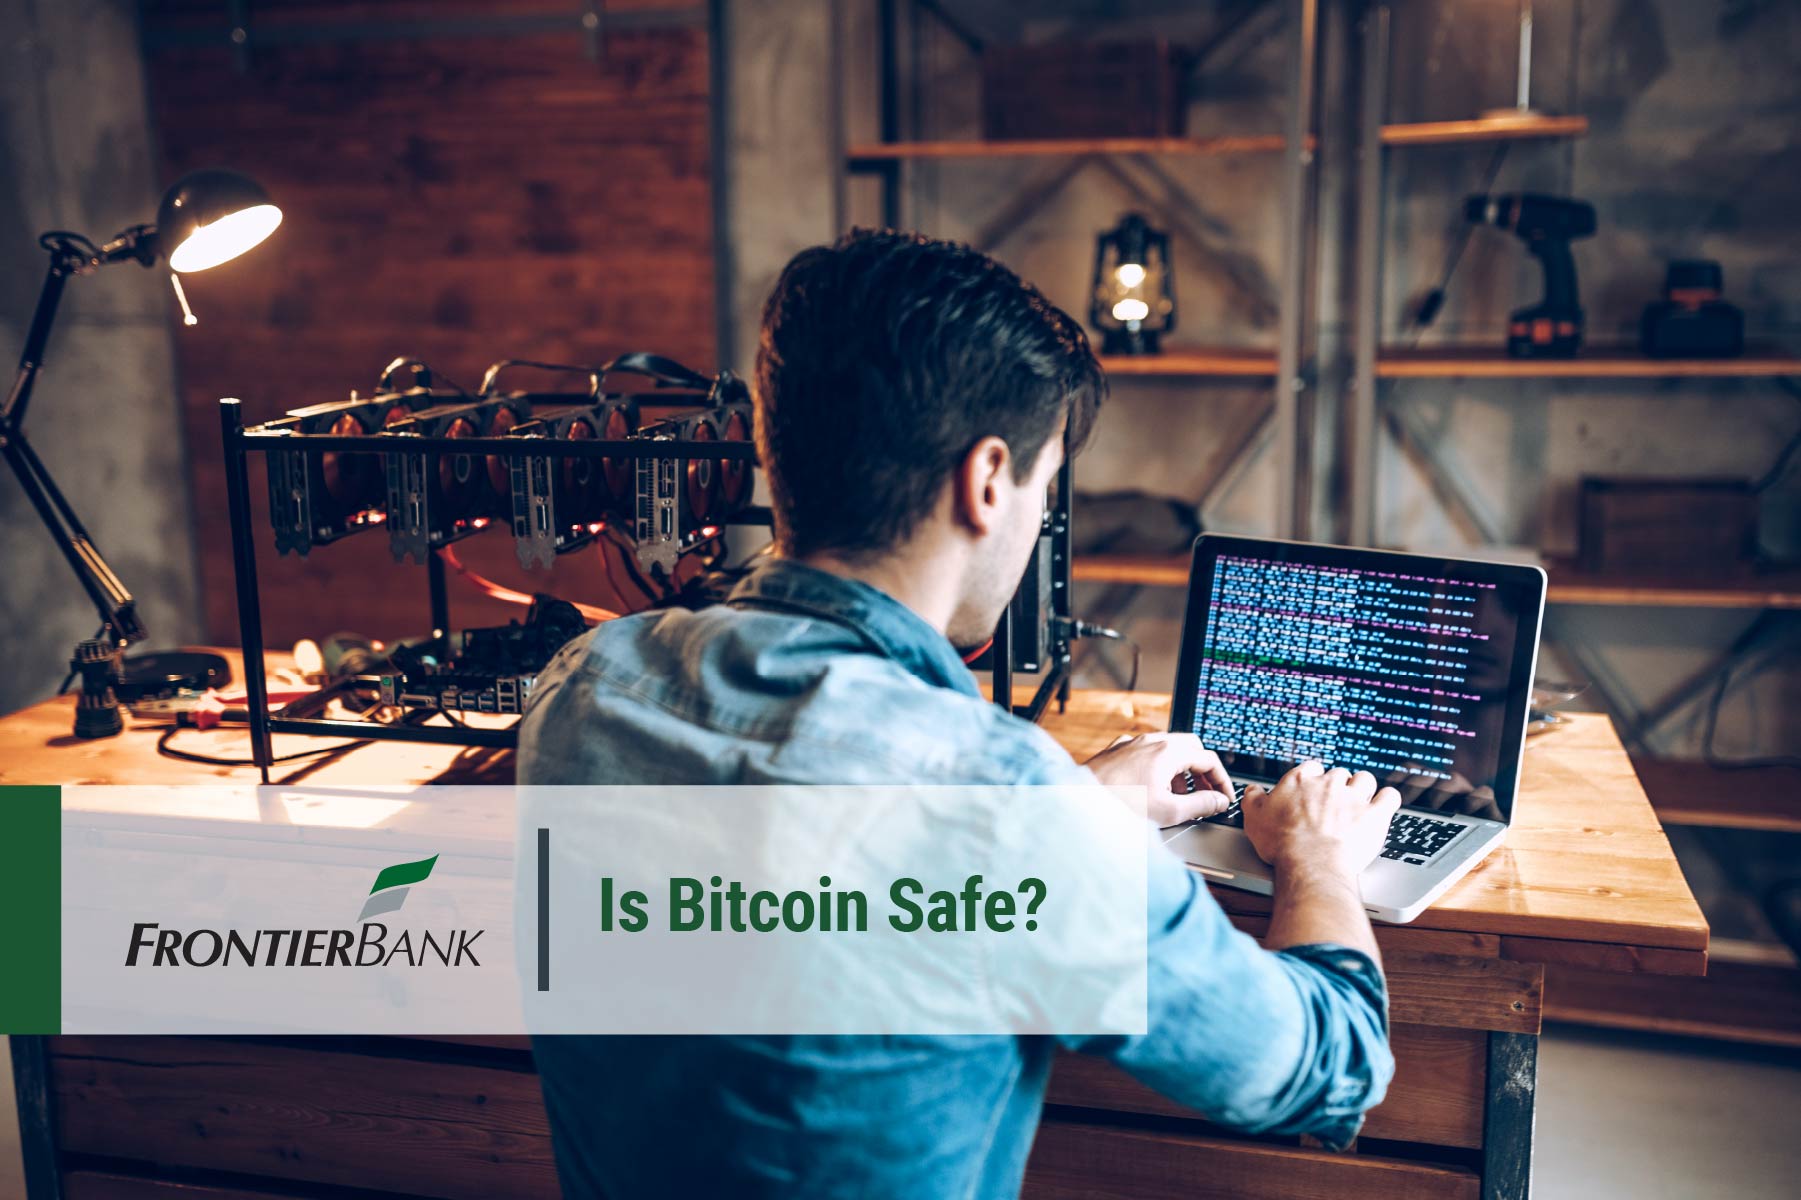 Is Bitcoin Safe with text